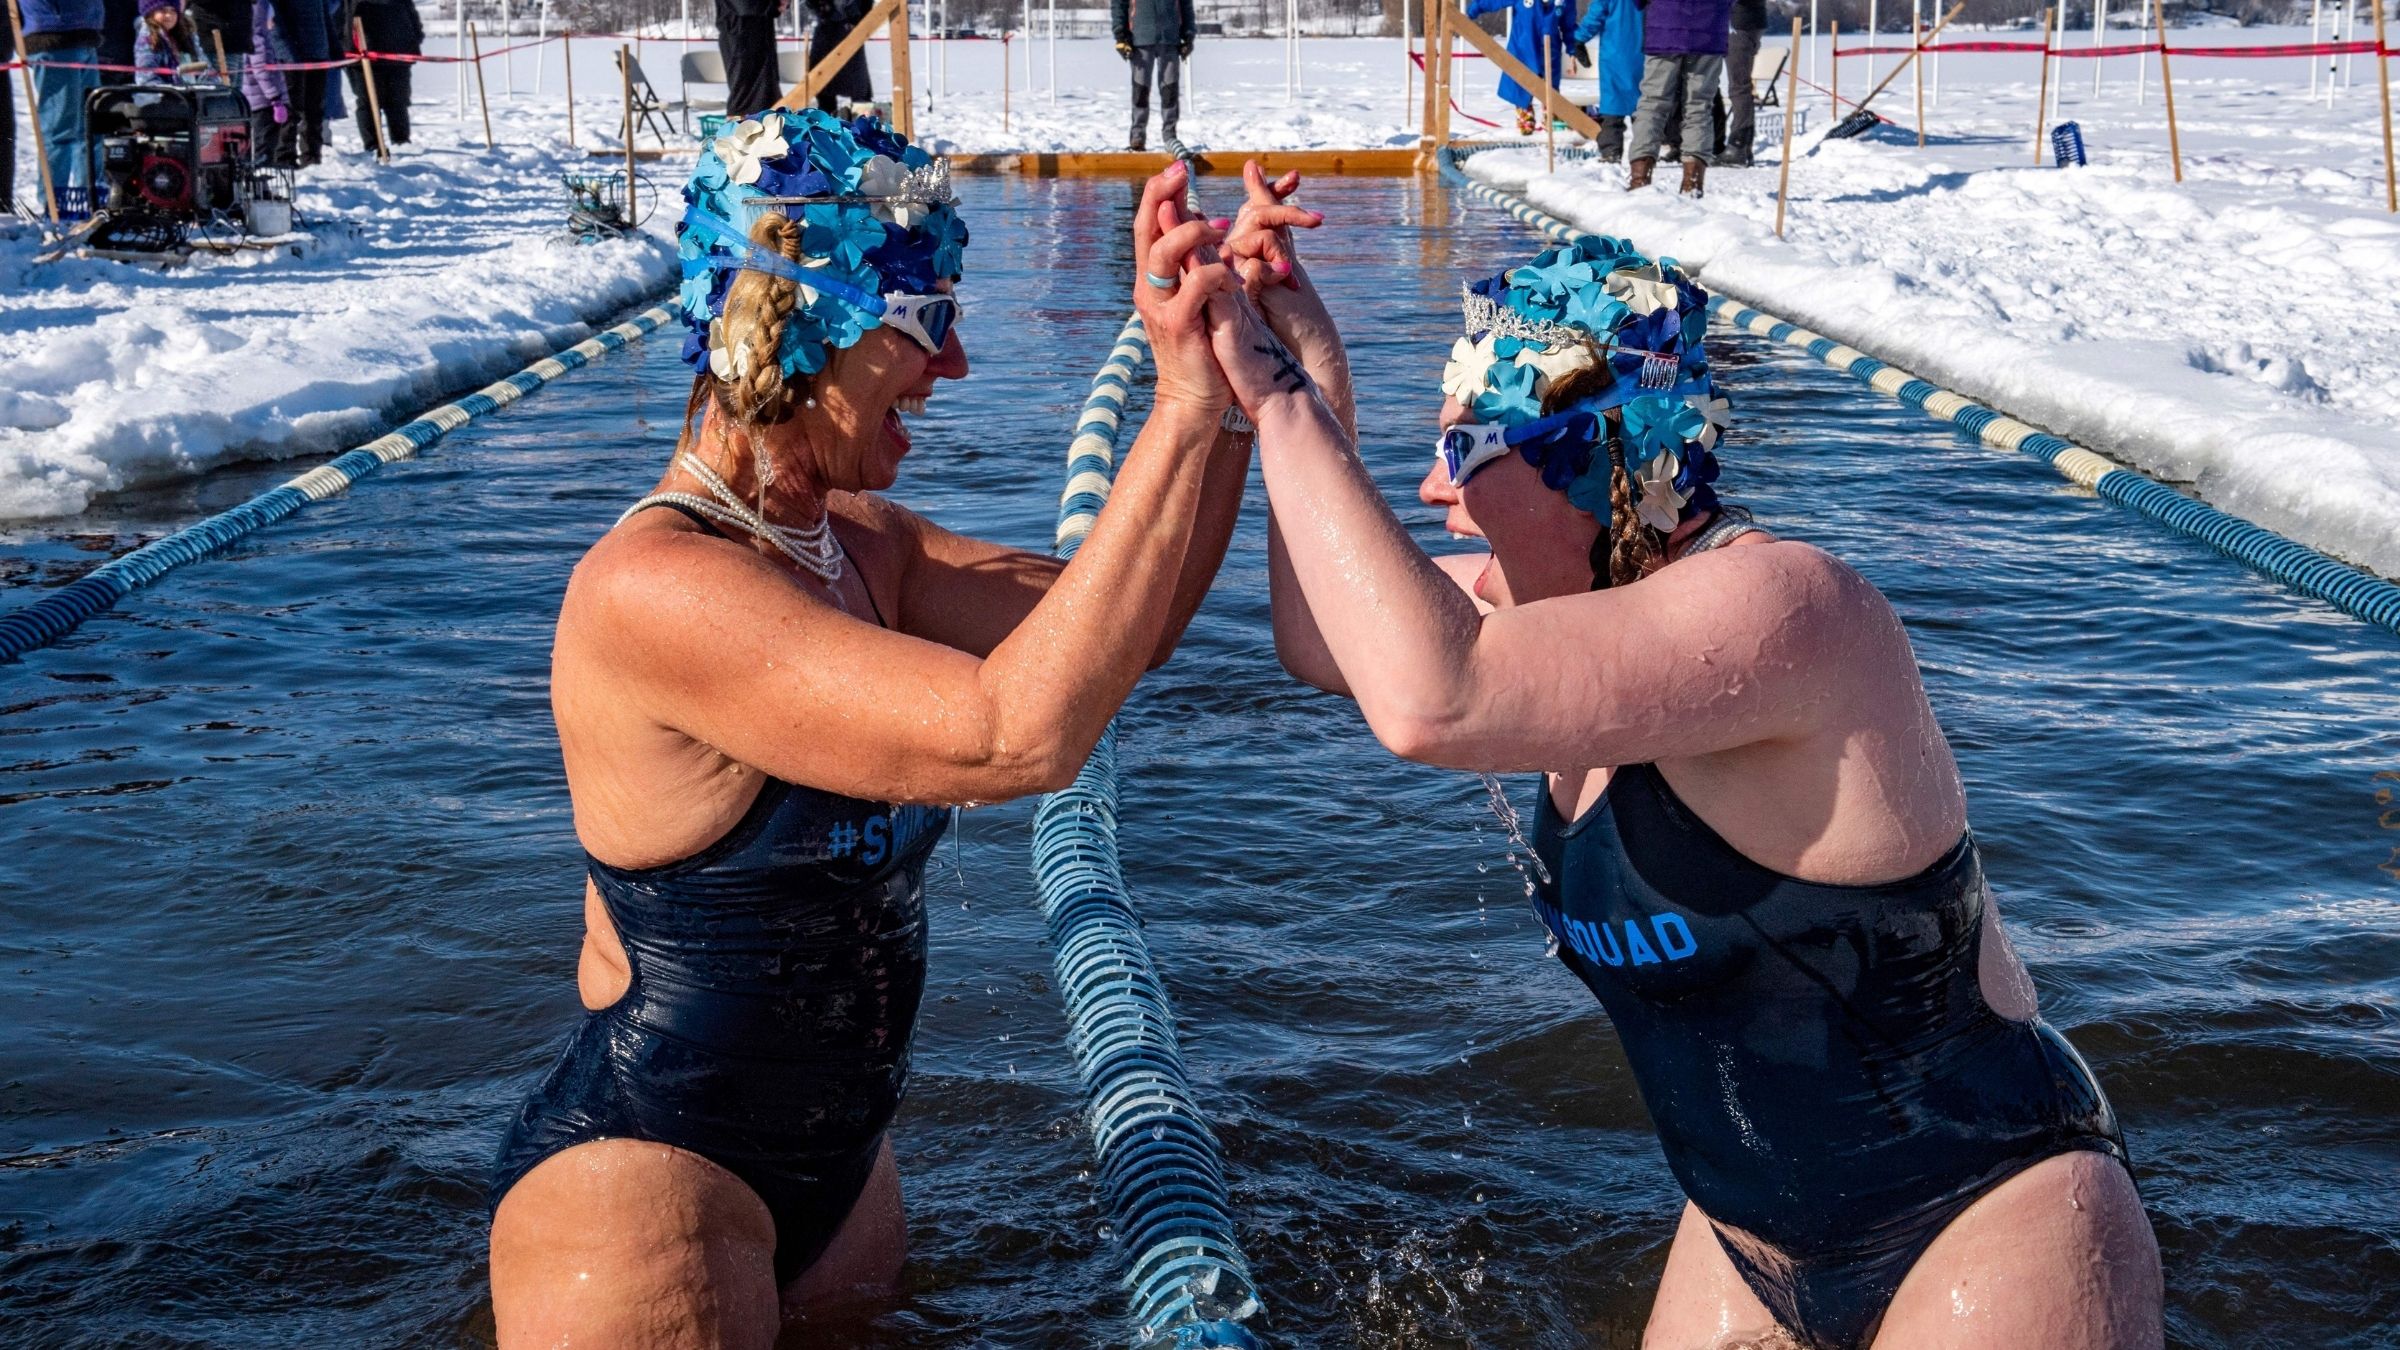 Try These 11 Amazing Open Water Swim Races